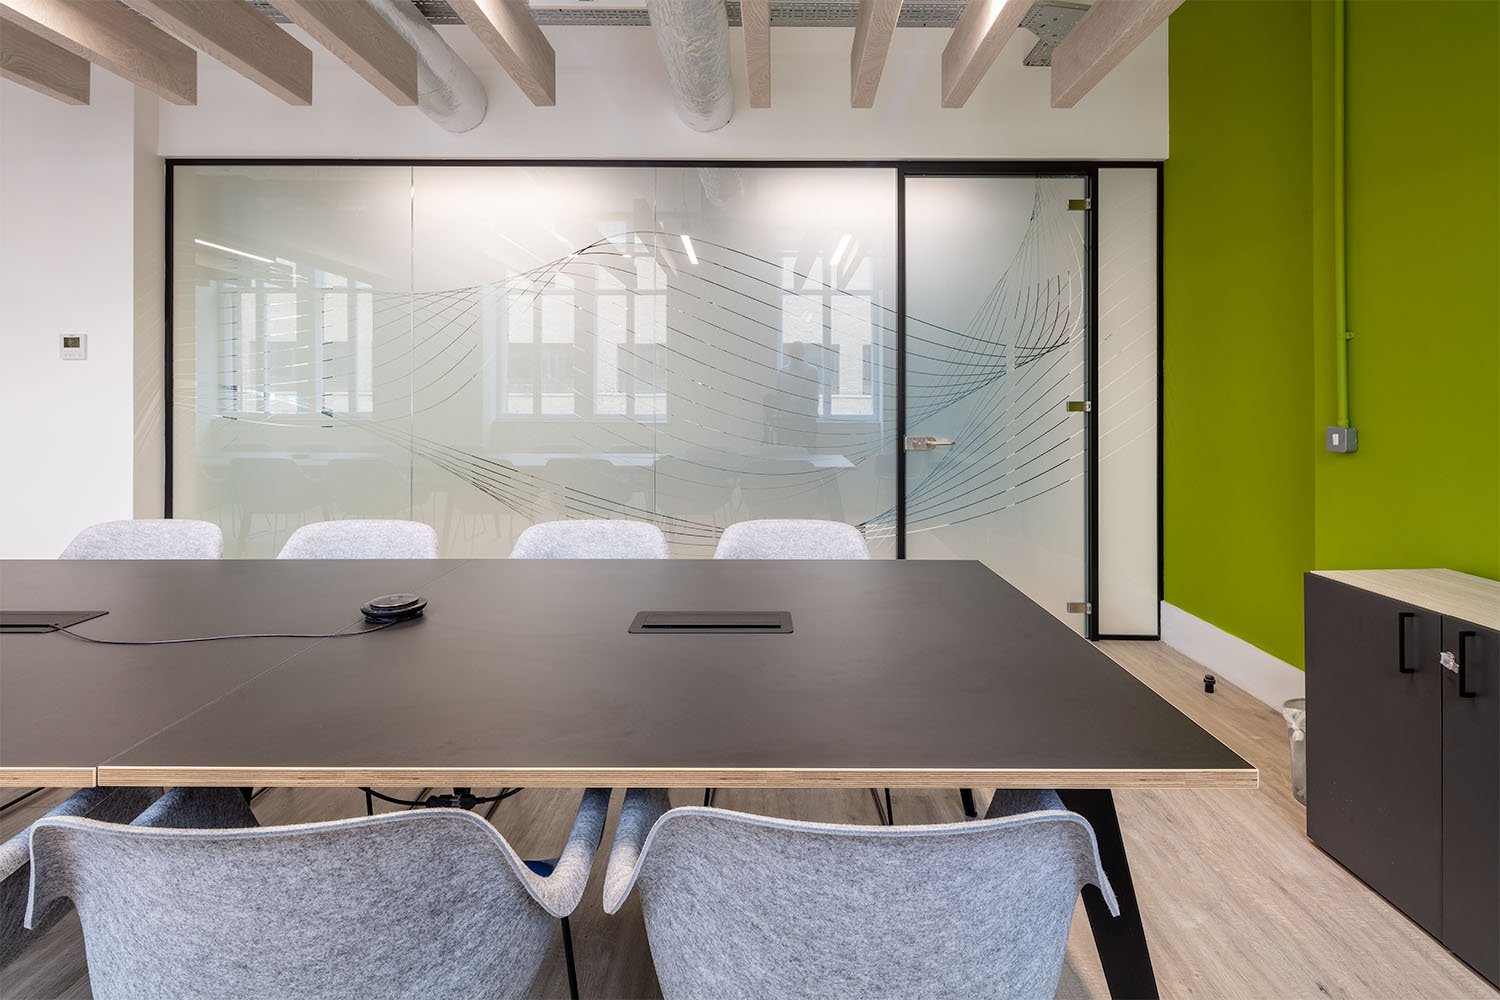 meeting room acoustics and glass partitioning